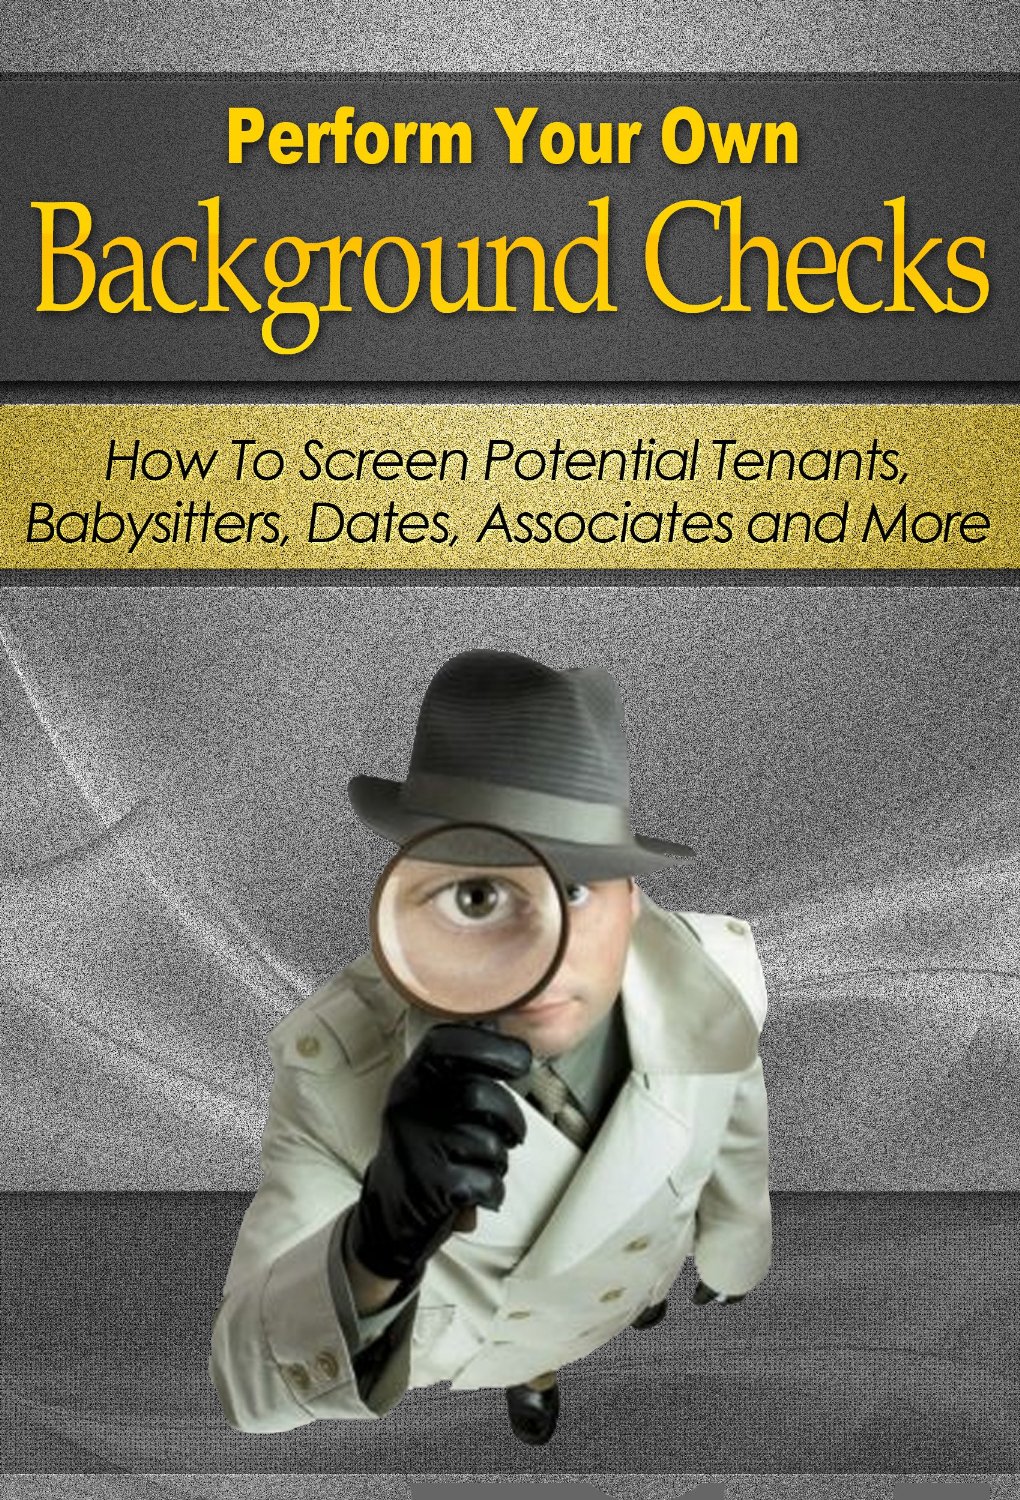 Perform Your Own Background Checks – How to Screen Potential Tenants, Babysitters, Dates, Associates and More by Benjamin Tideas